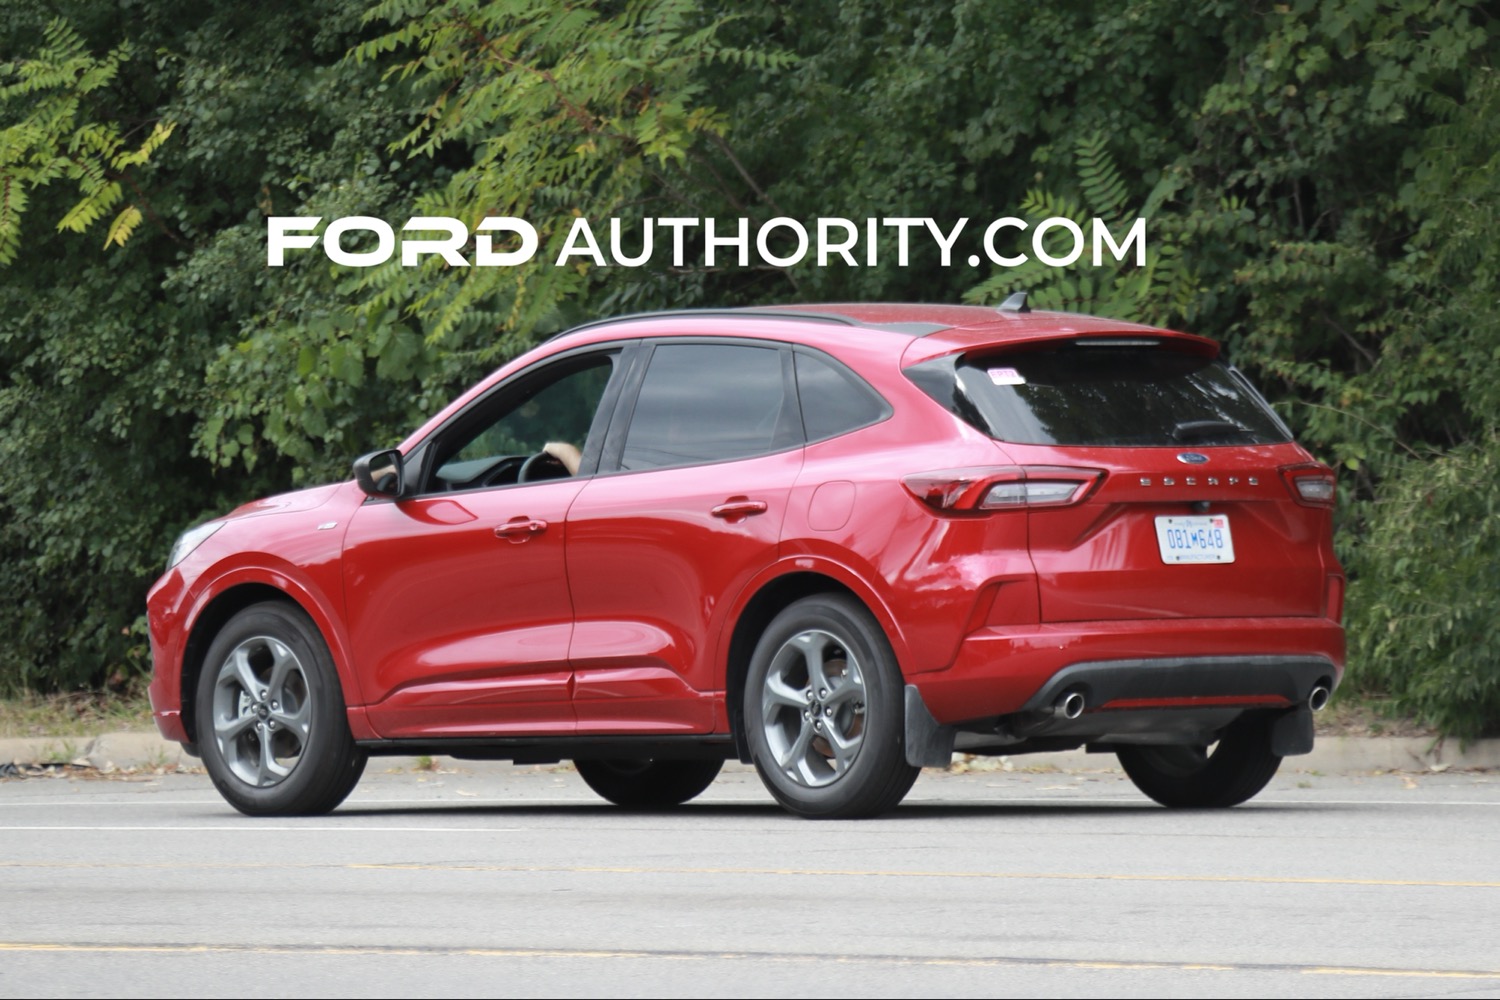 2023 Ford Escape Adds New Cinnabar Red Metallic Color